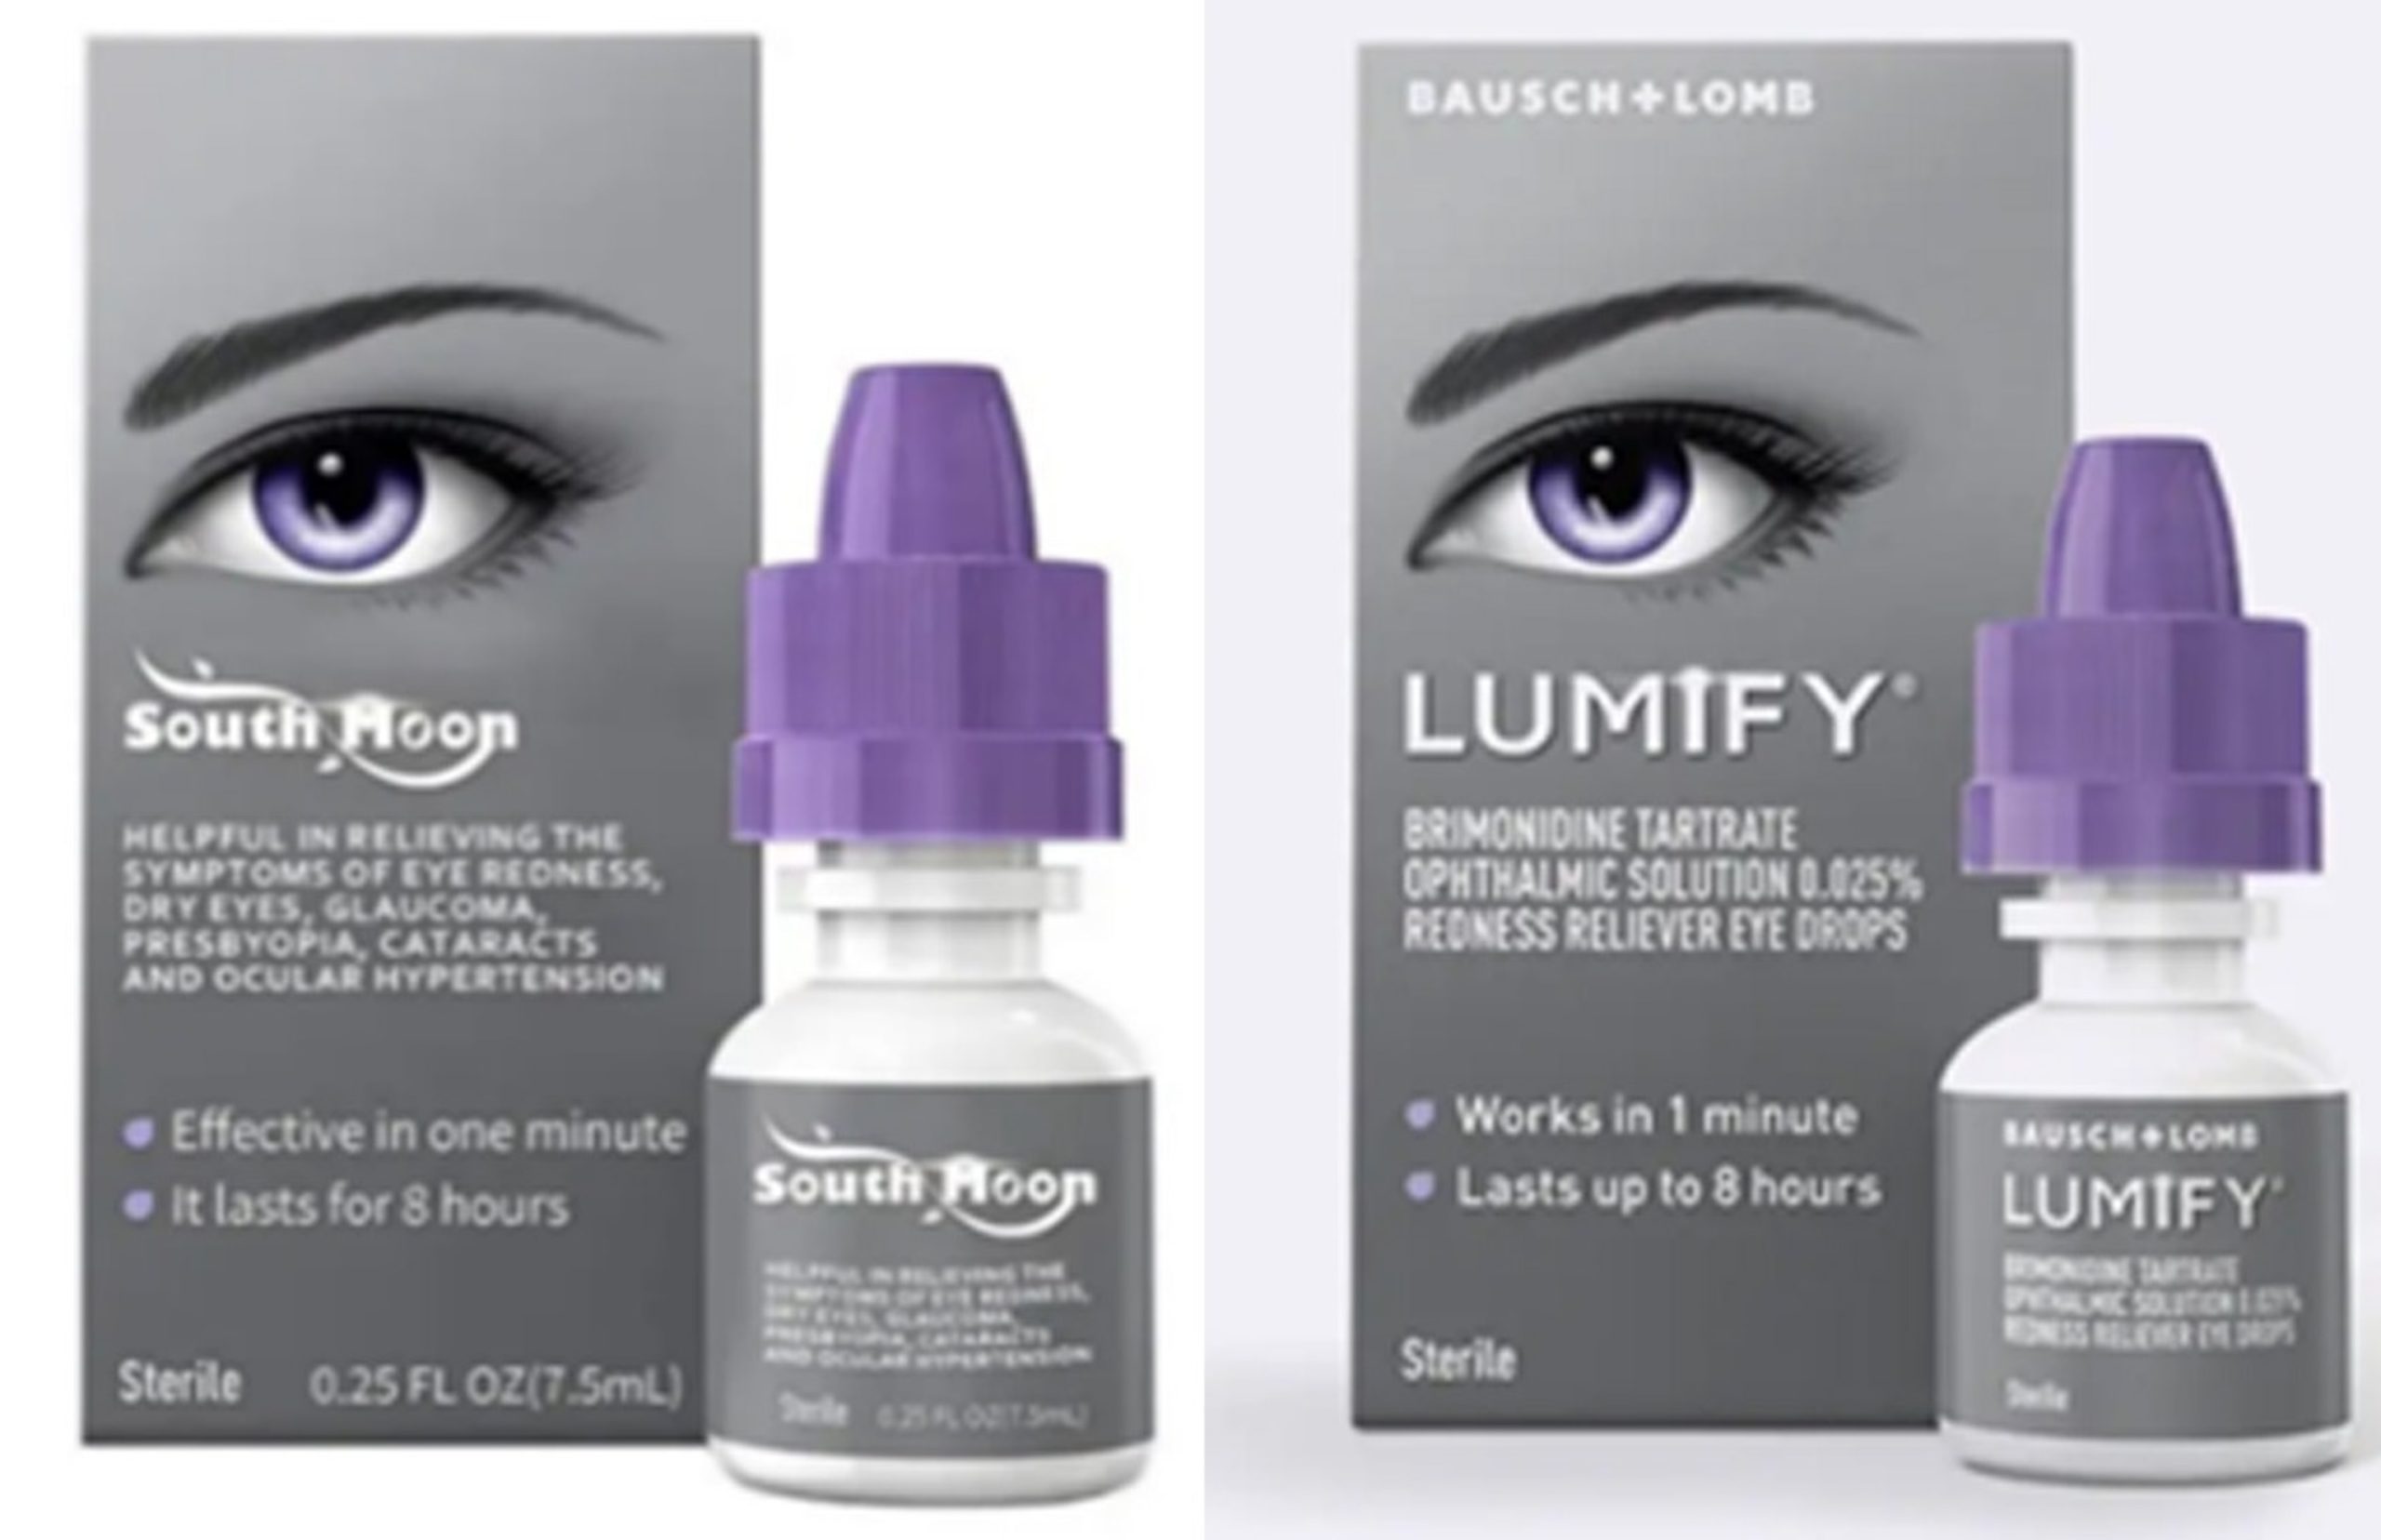 FDA issues warning about contaminated 'copycat' eye drops that may lead to infections